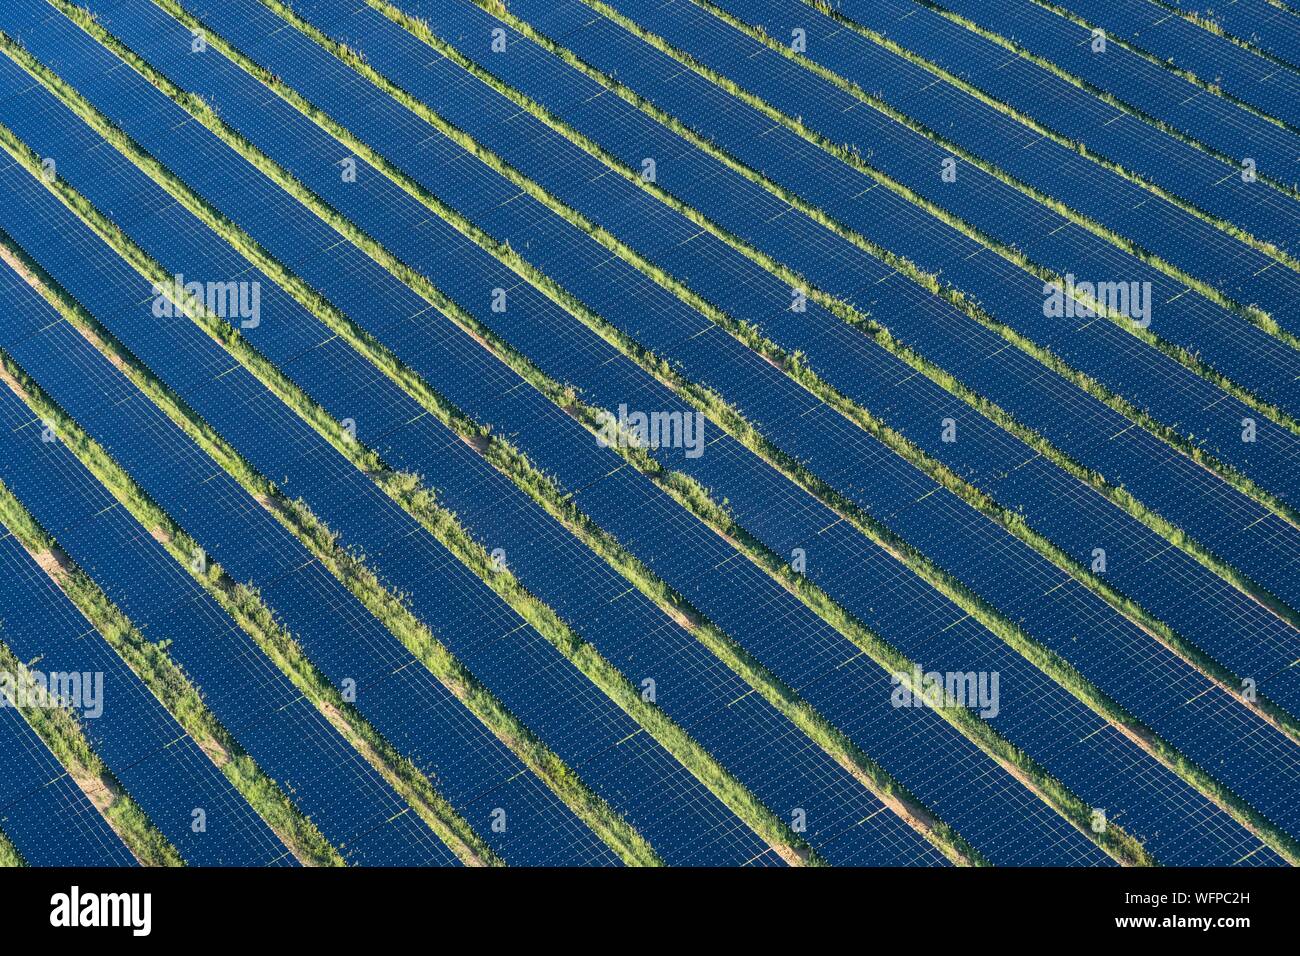 France, Eure (27), Saint-Marcel, Terres Neuves 1, the largest photovoltaic power plant in Normandy. carried out by the RES group on the site of the CNPP Pôle européen de sécurité (aerial view) Stock Photo